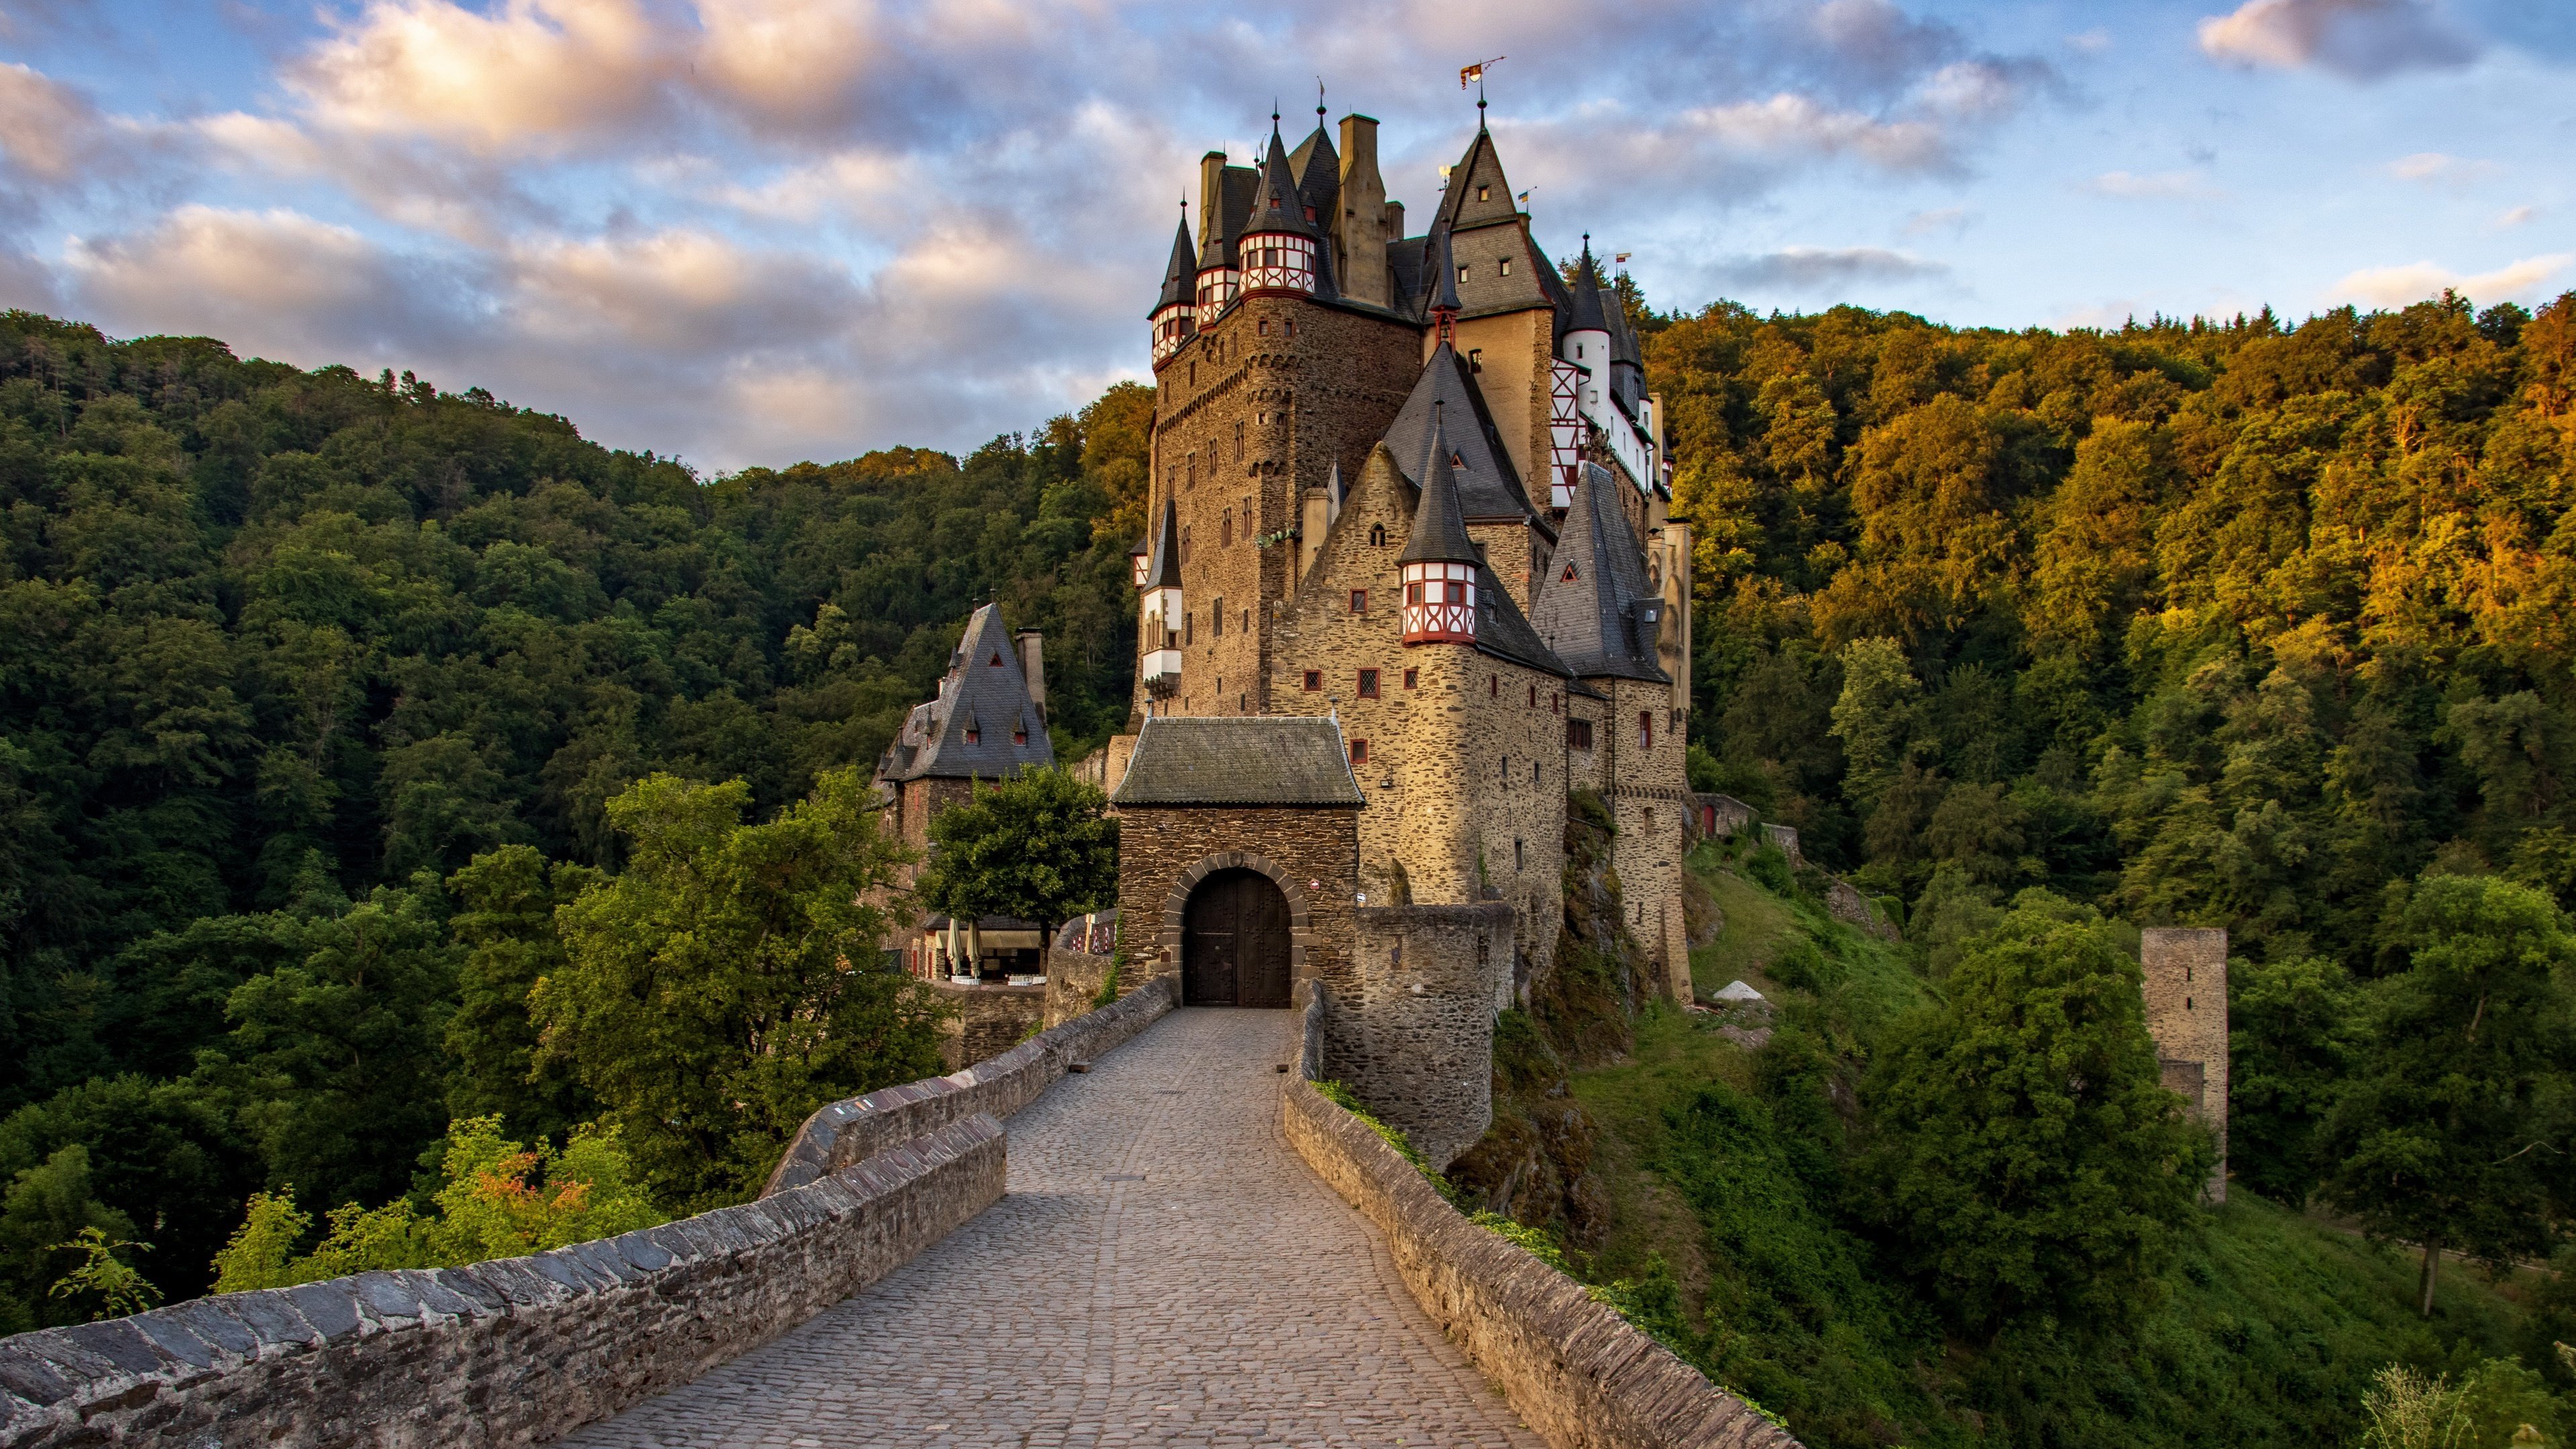 General 3840x2160 castle building greenery Eltz Castle architecture trees clouds path Germany sky